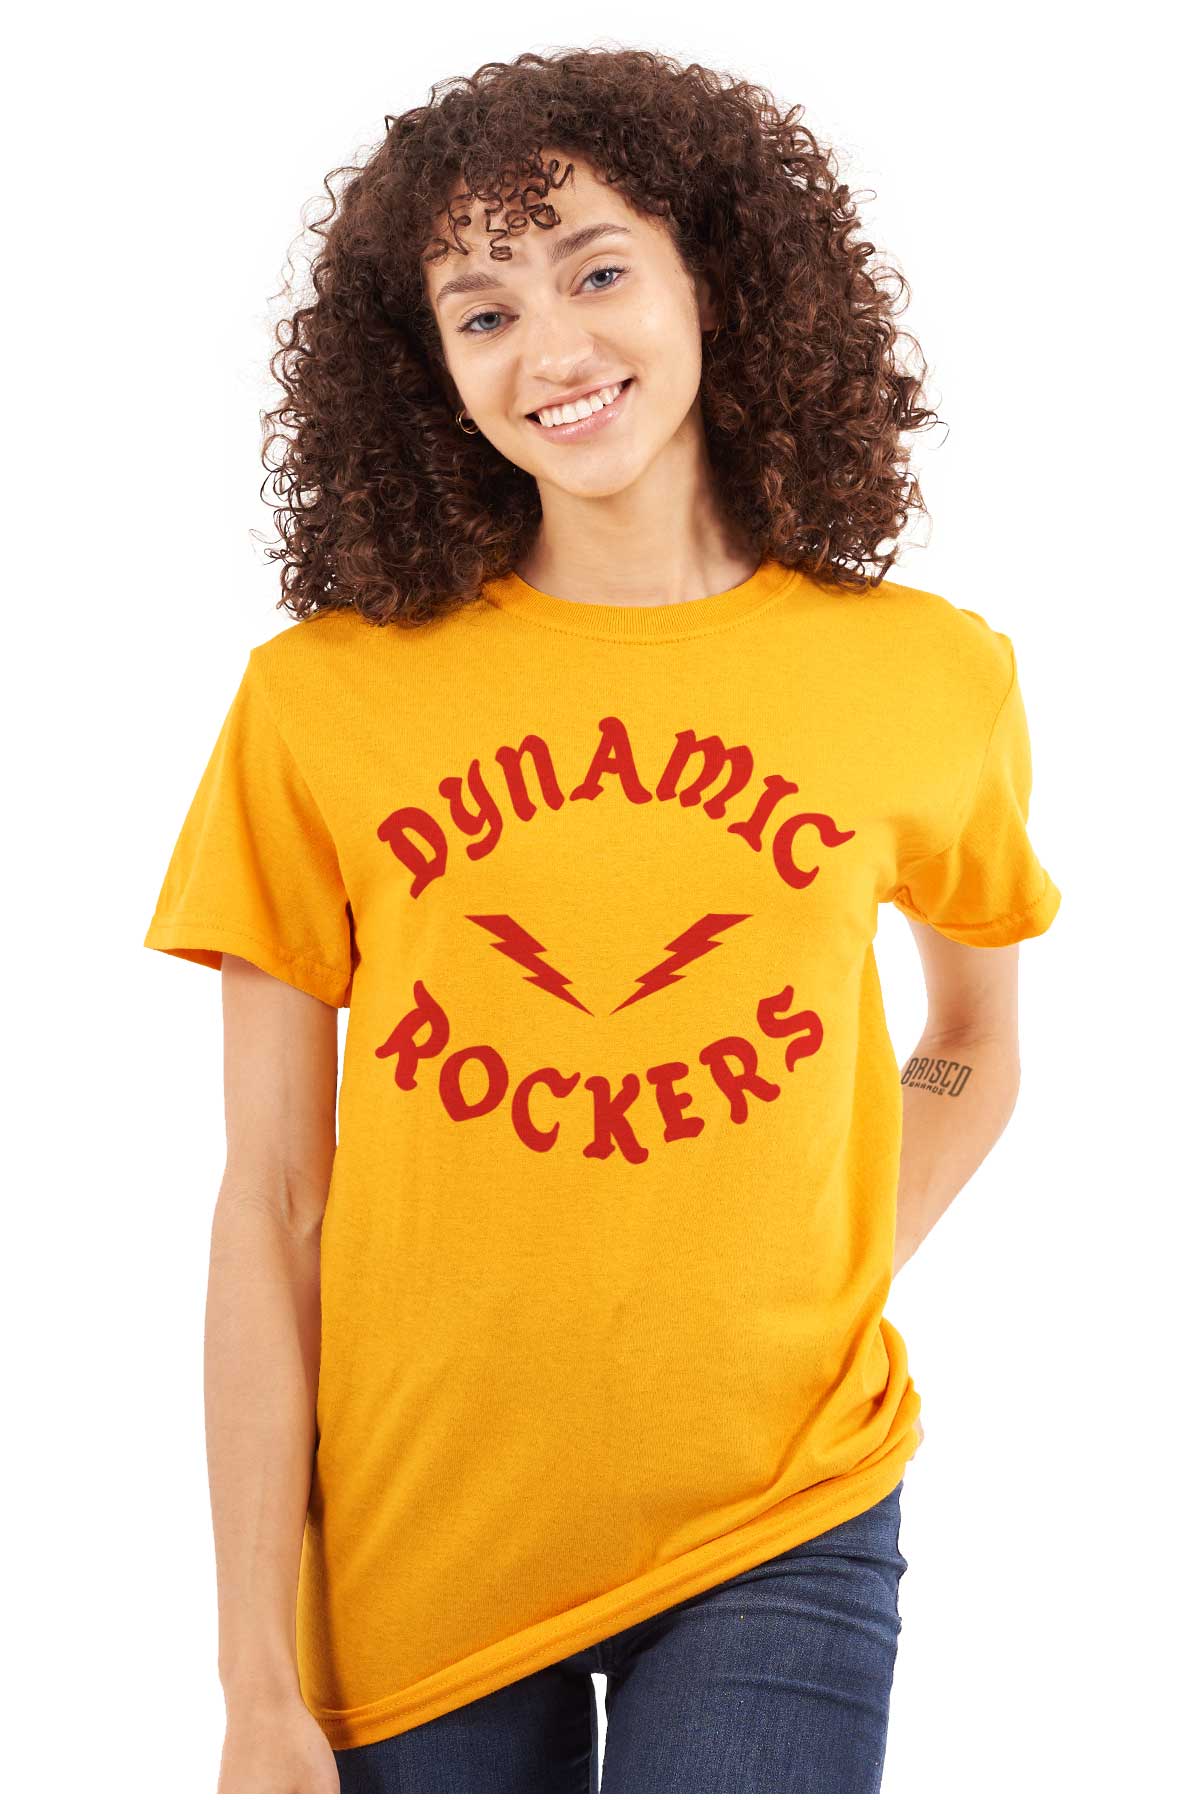 This design showcases the electric and energetic vibe of hip-hop culture. It represents the unstoppable force and spirit of the Rockers crew. Embrace the intense and bold presence that defines hip-hop culture.